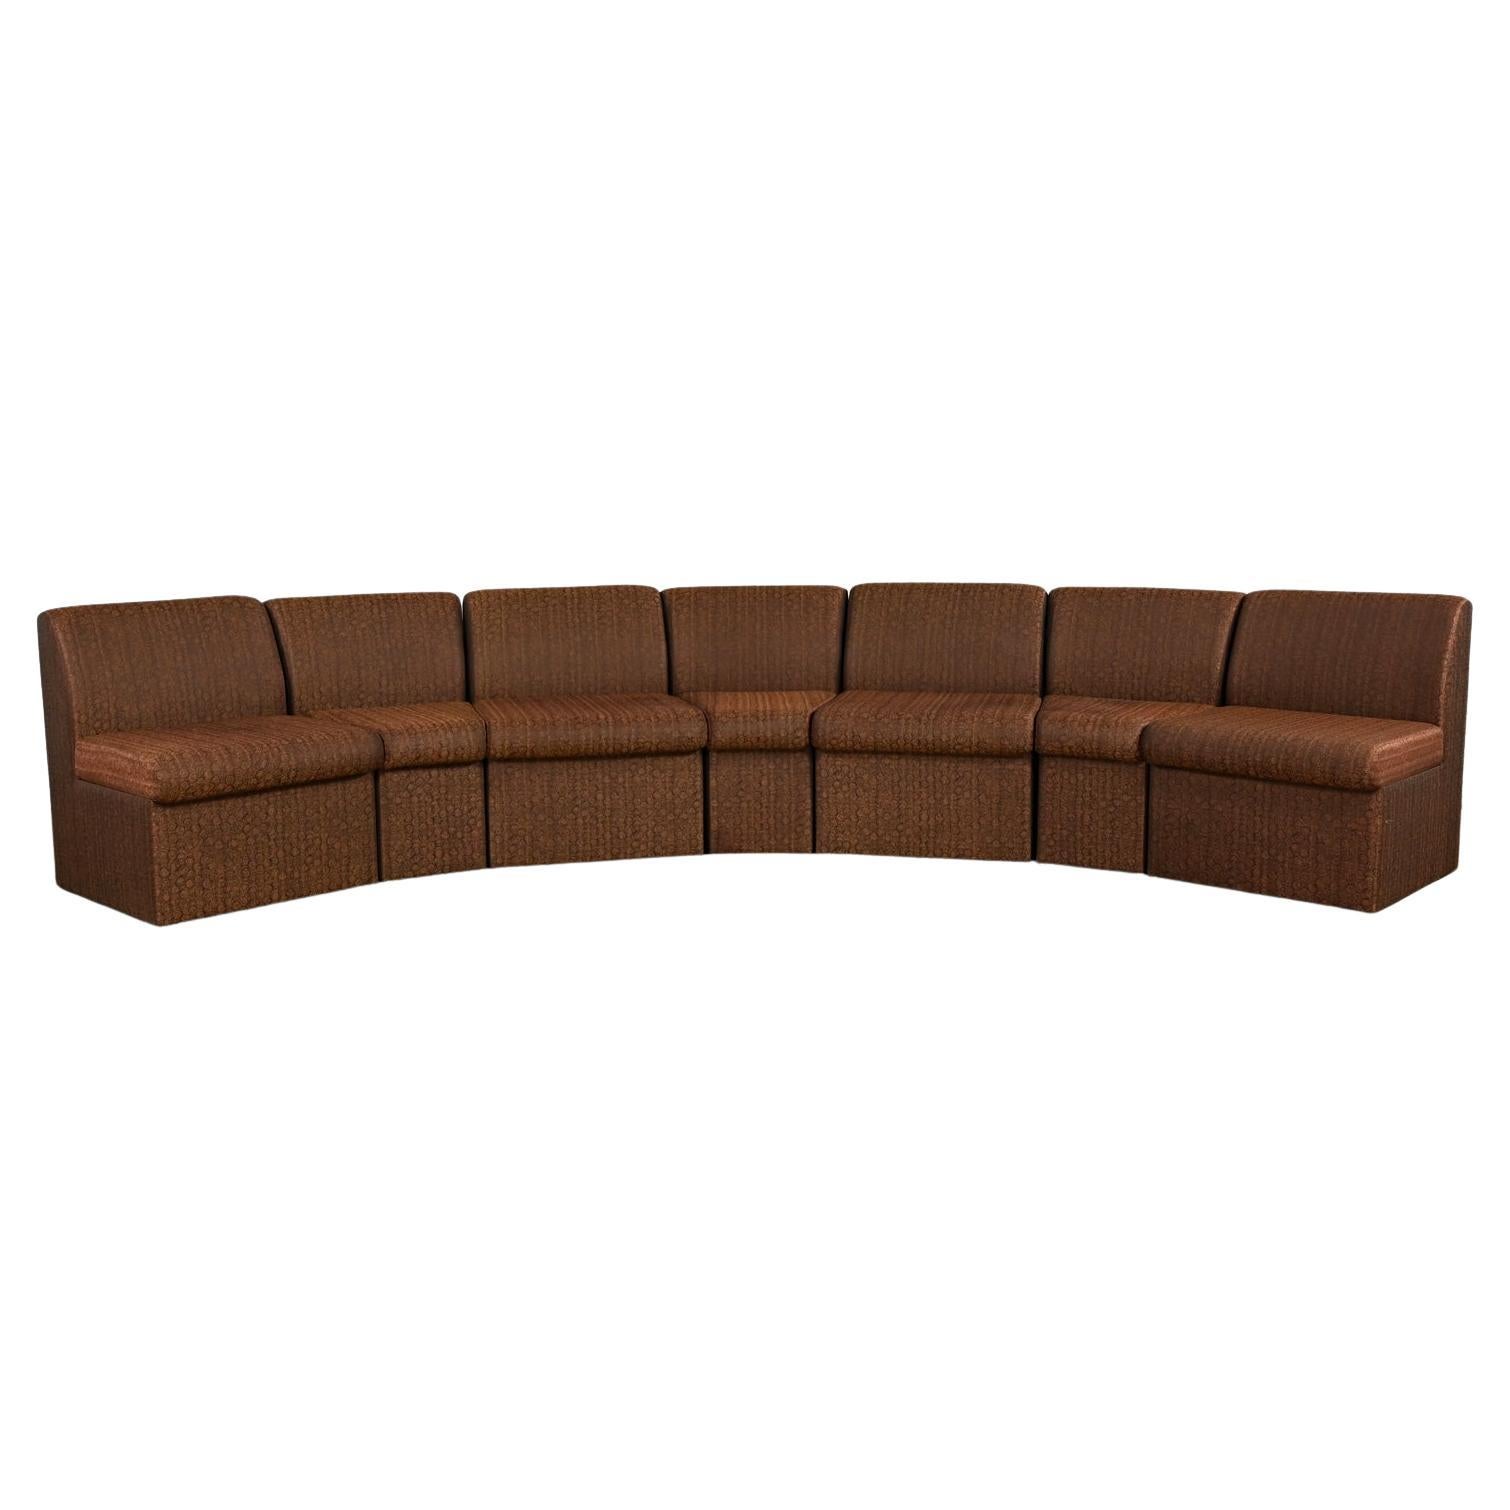 Fin du 20e siècle Modernity Global Upholstery Company Canapé sectionnel 7 pièces Brown